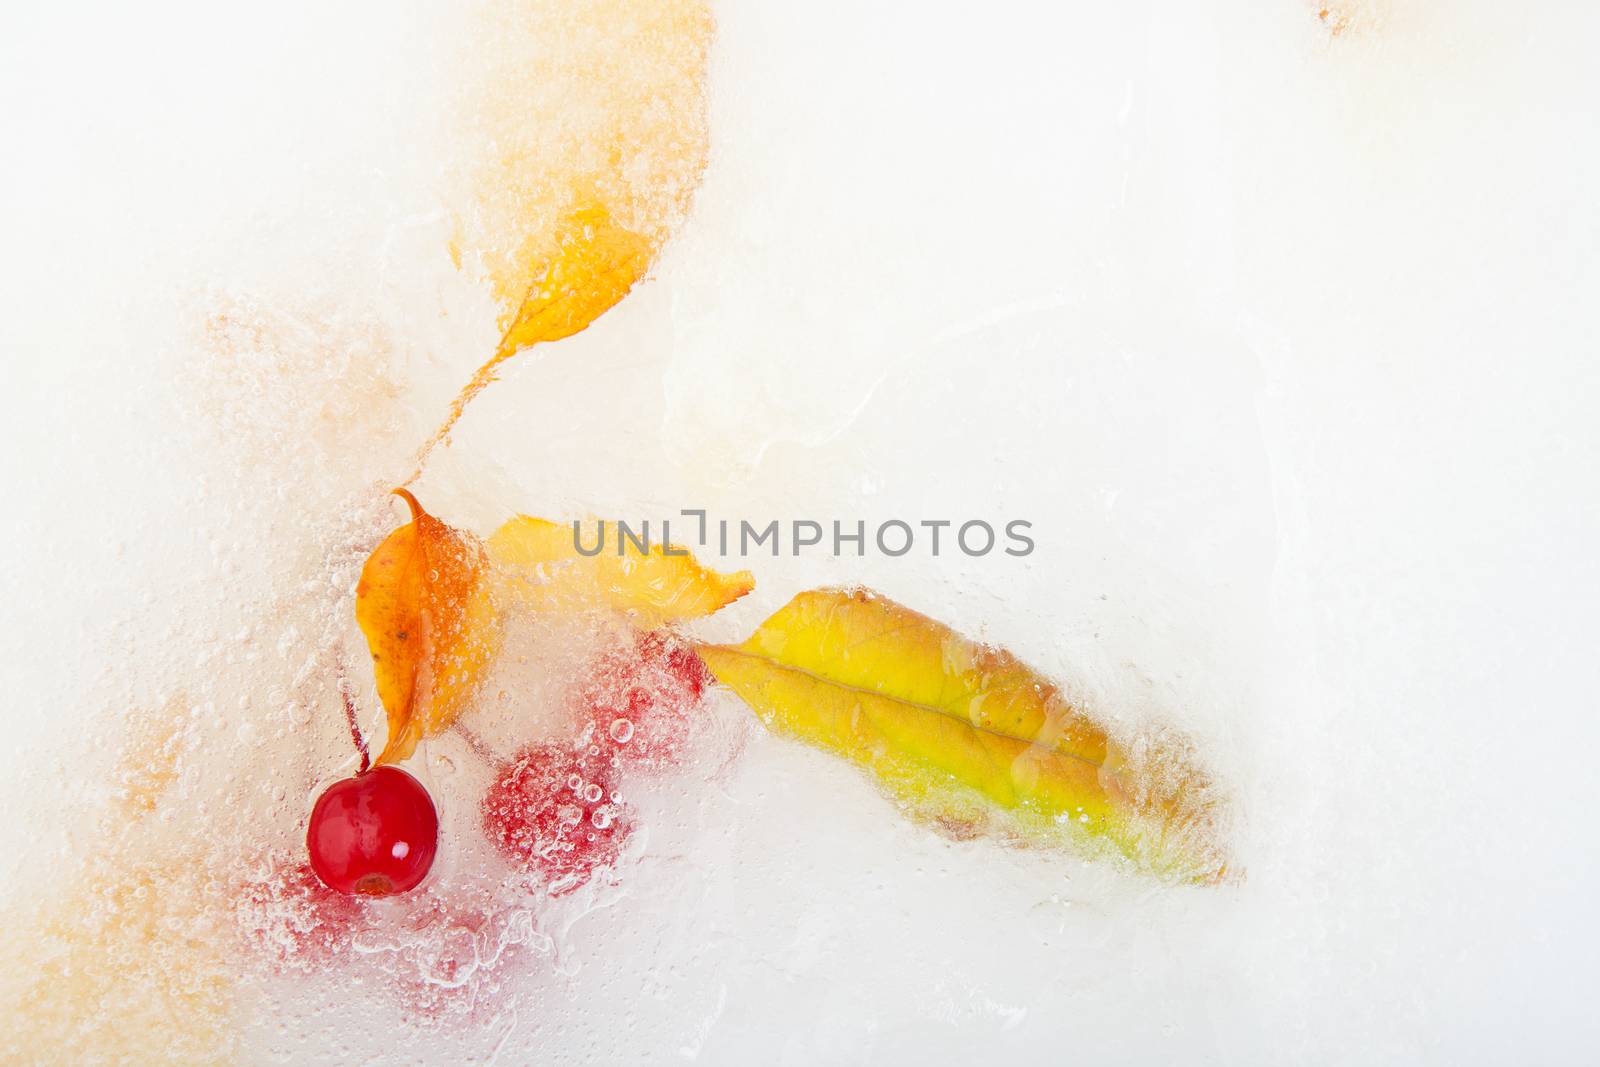 Yellowed leaves & red berries frozen in an icy puddle of water.